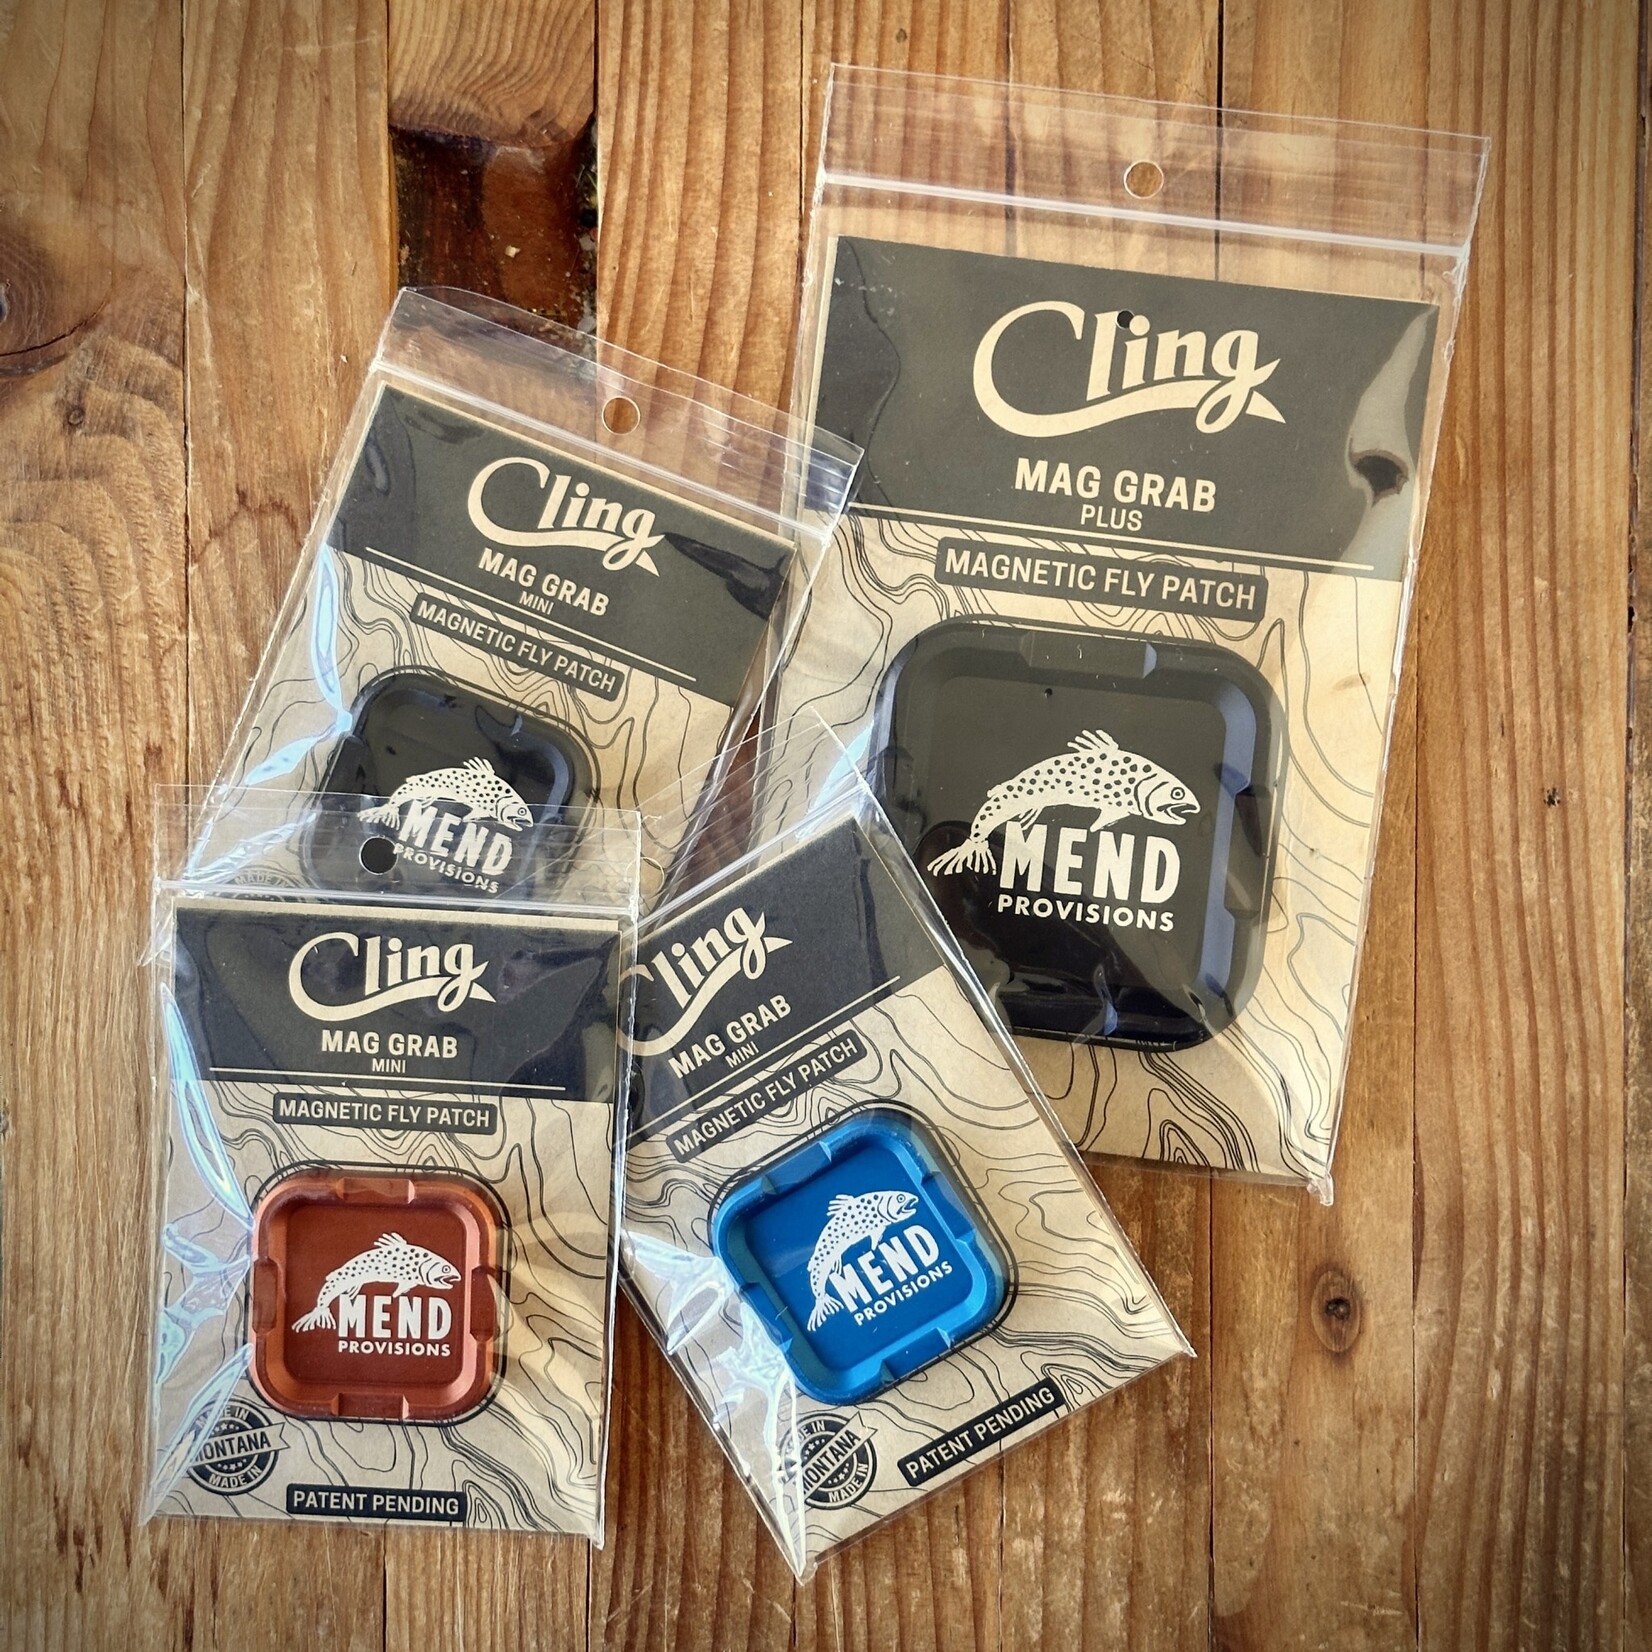 Cling MEND x CLING MAGNETIC FLY PATCH - MAG GRAB PLUS